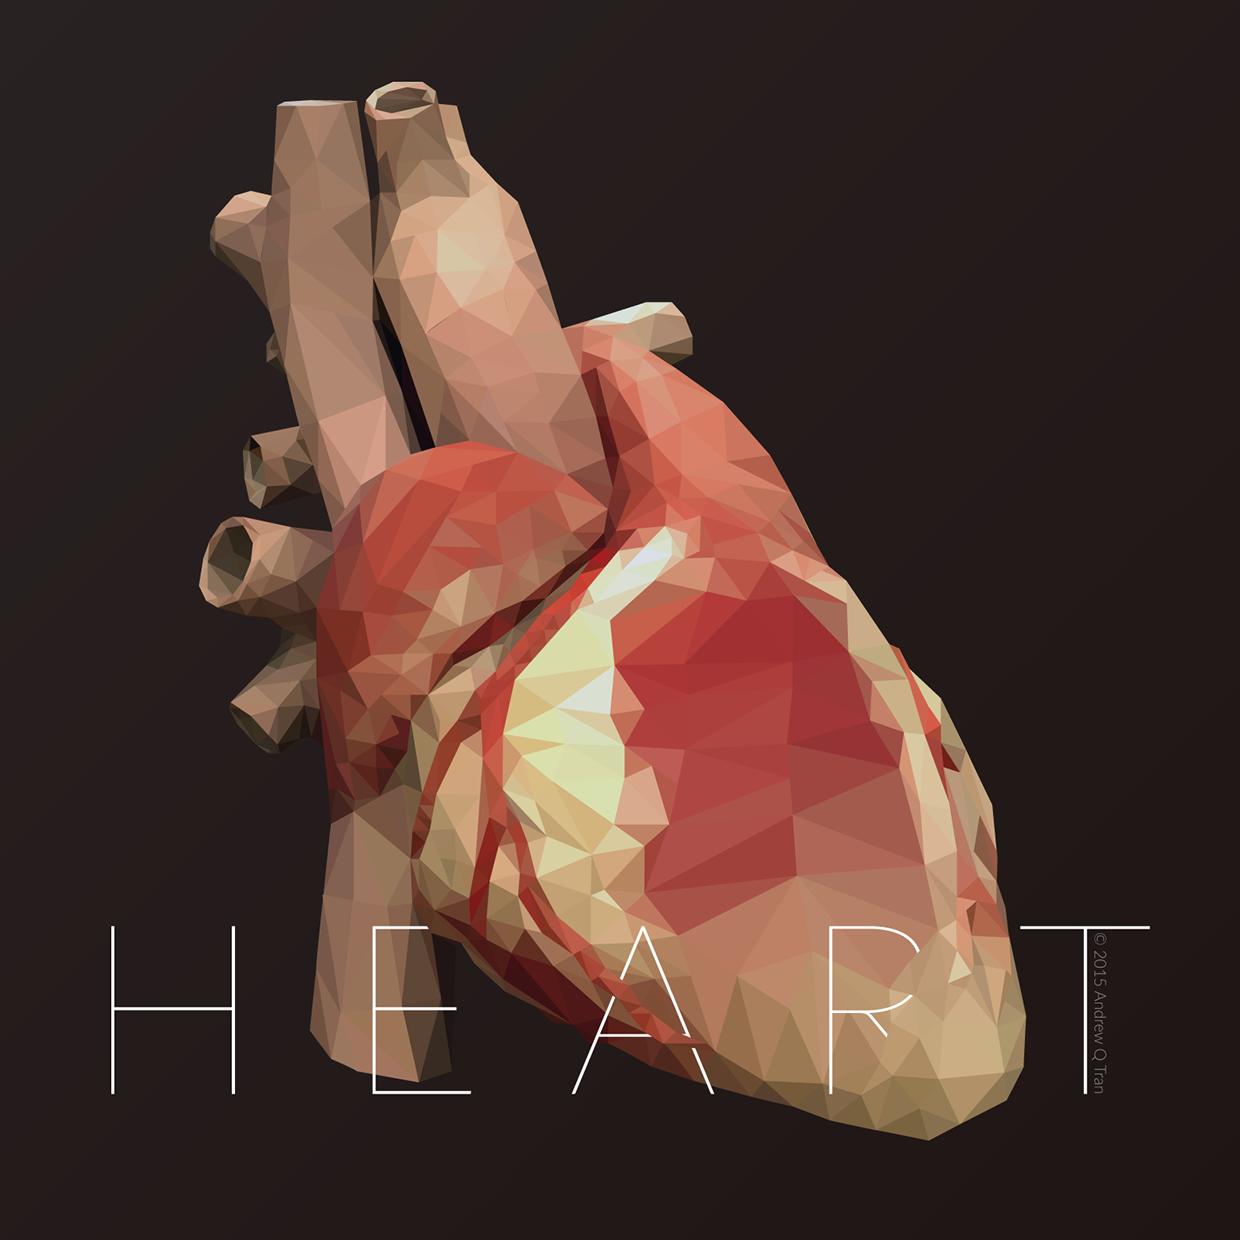 Low-poly illustration of a heart